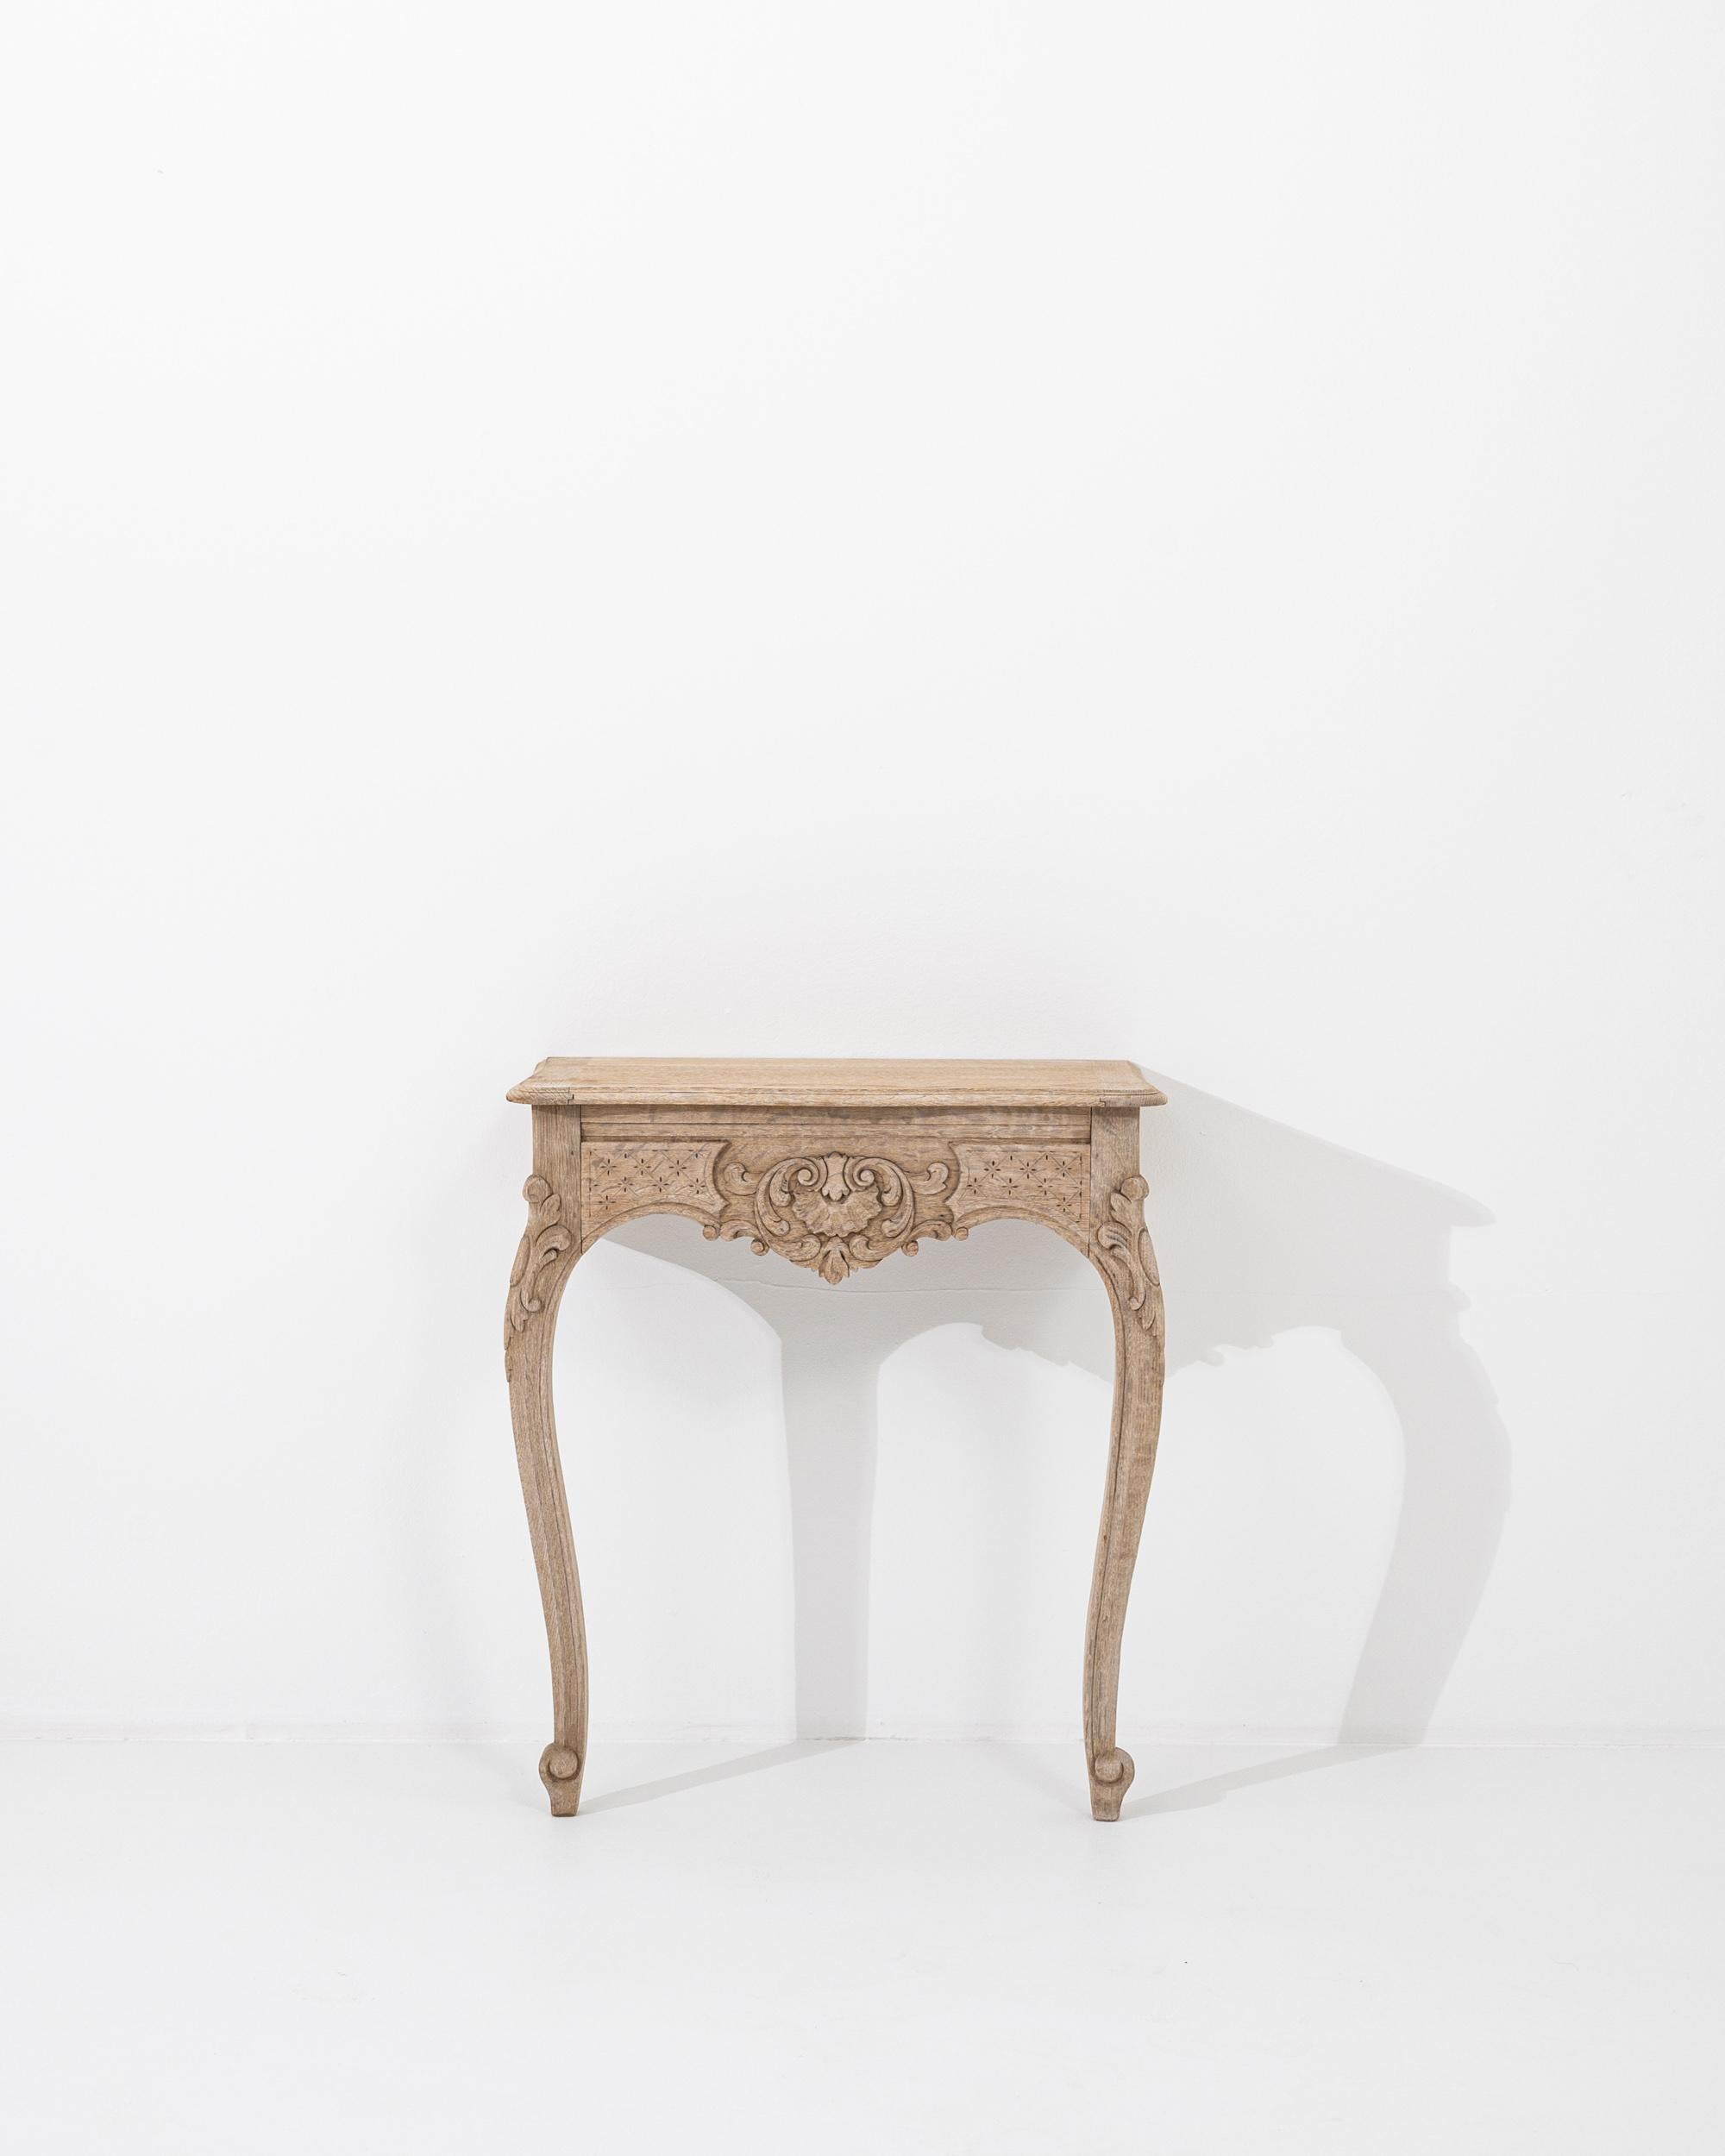 A wooden console table created in 1900s France. This elegant console table appears to simply emerge right out through the wall to extend its sumptuously curved legs. Lavishly embellished floral and geometric motifs are hand-carved across its